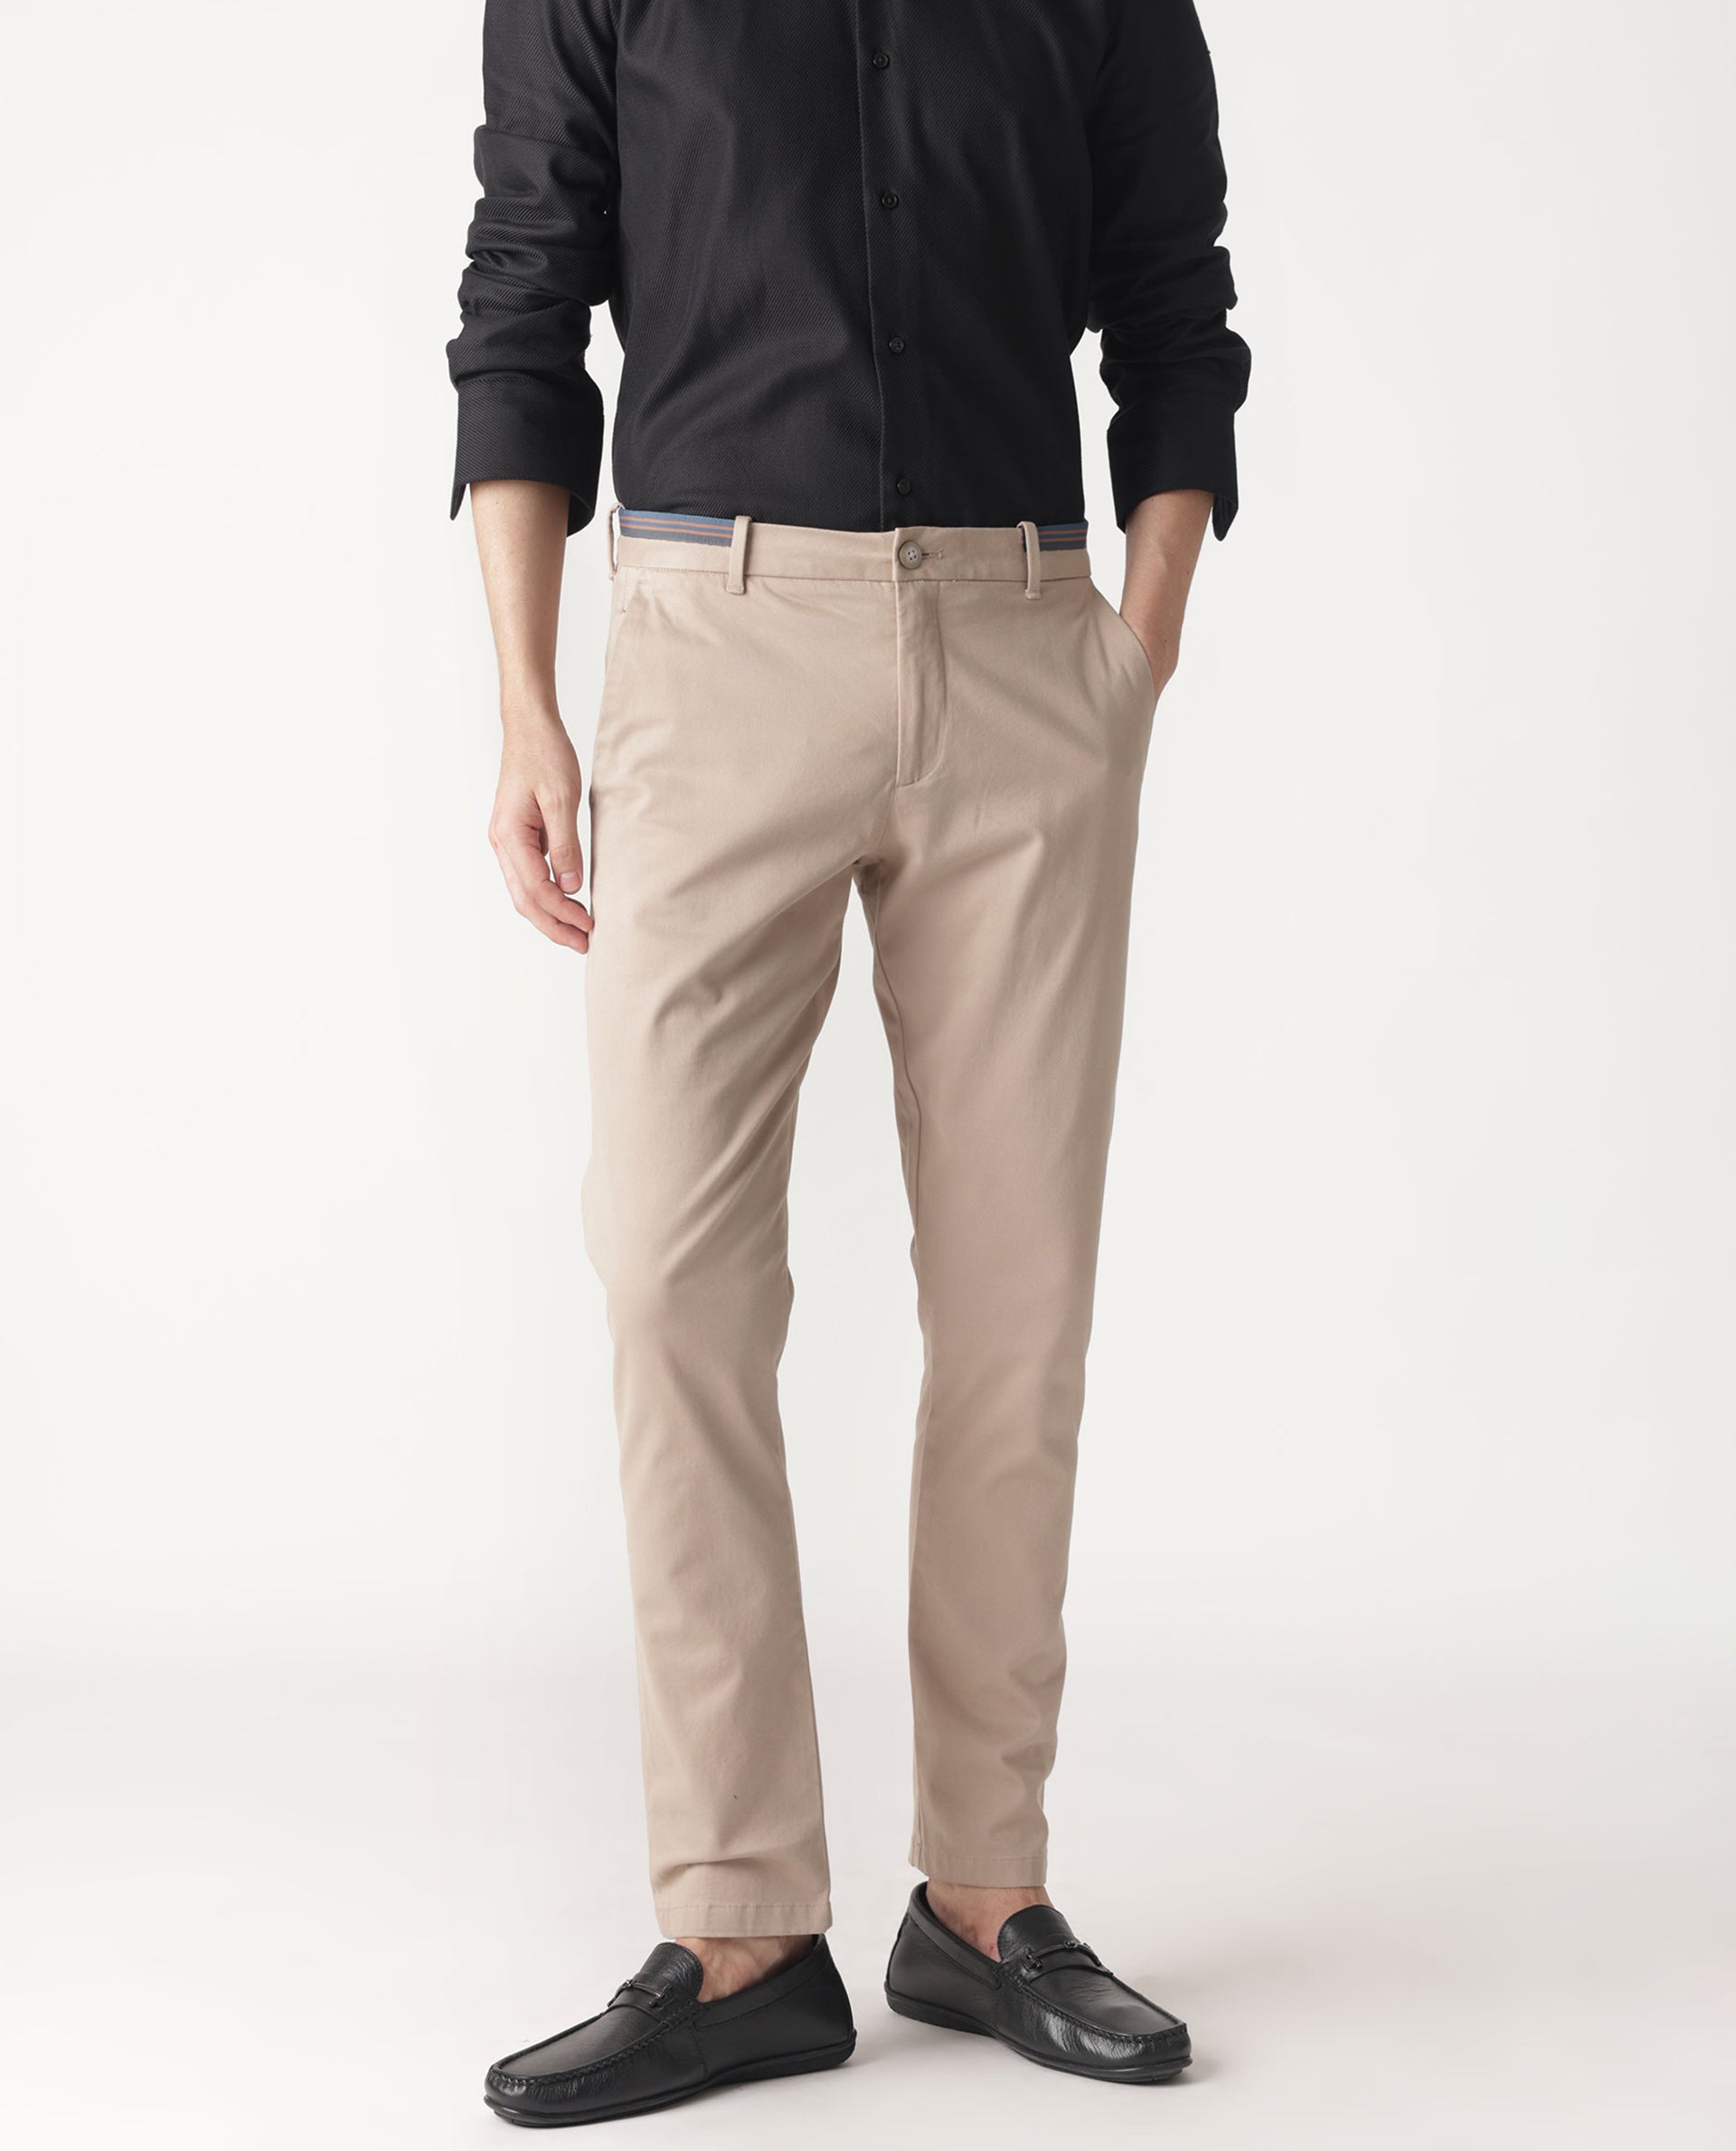 O'Connell's Khakis - plain front Cotton Twill Trousers - Oyster - Men's  Clothing, Traditional Natural shouldered clothing, preppy apparel